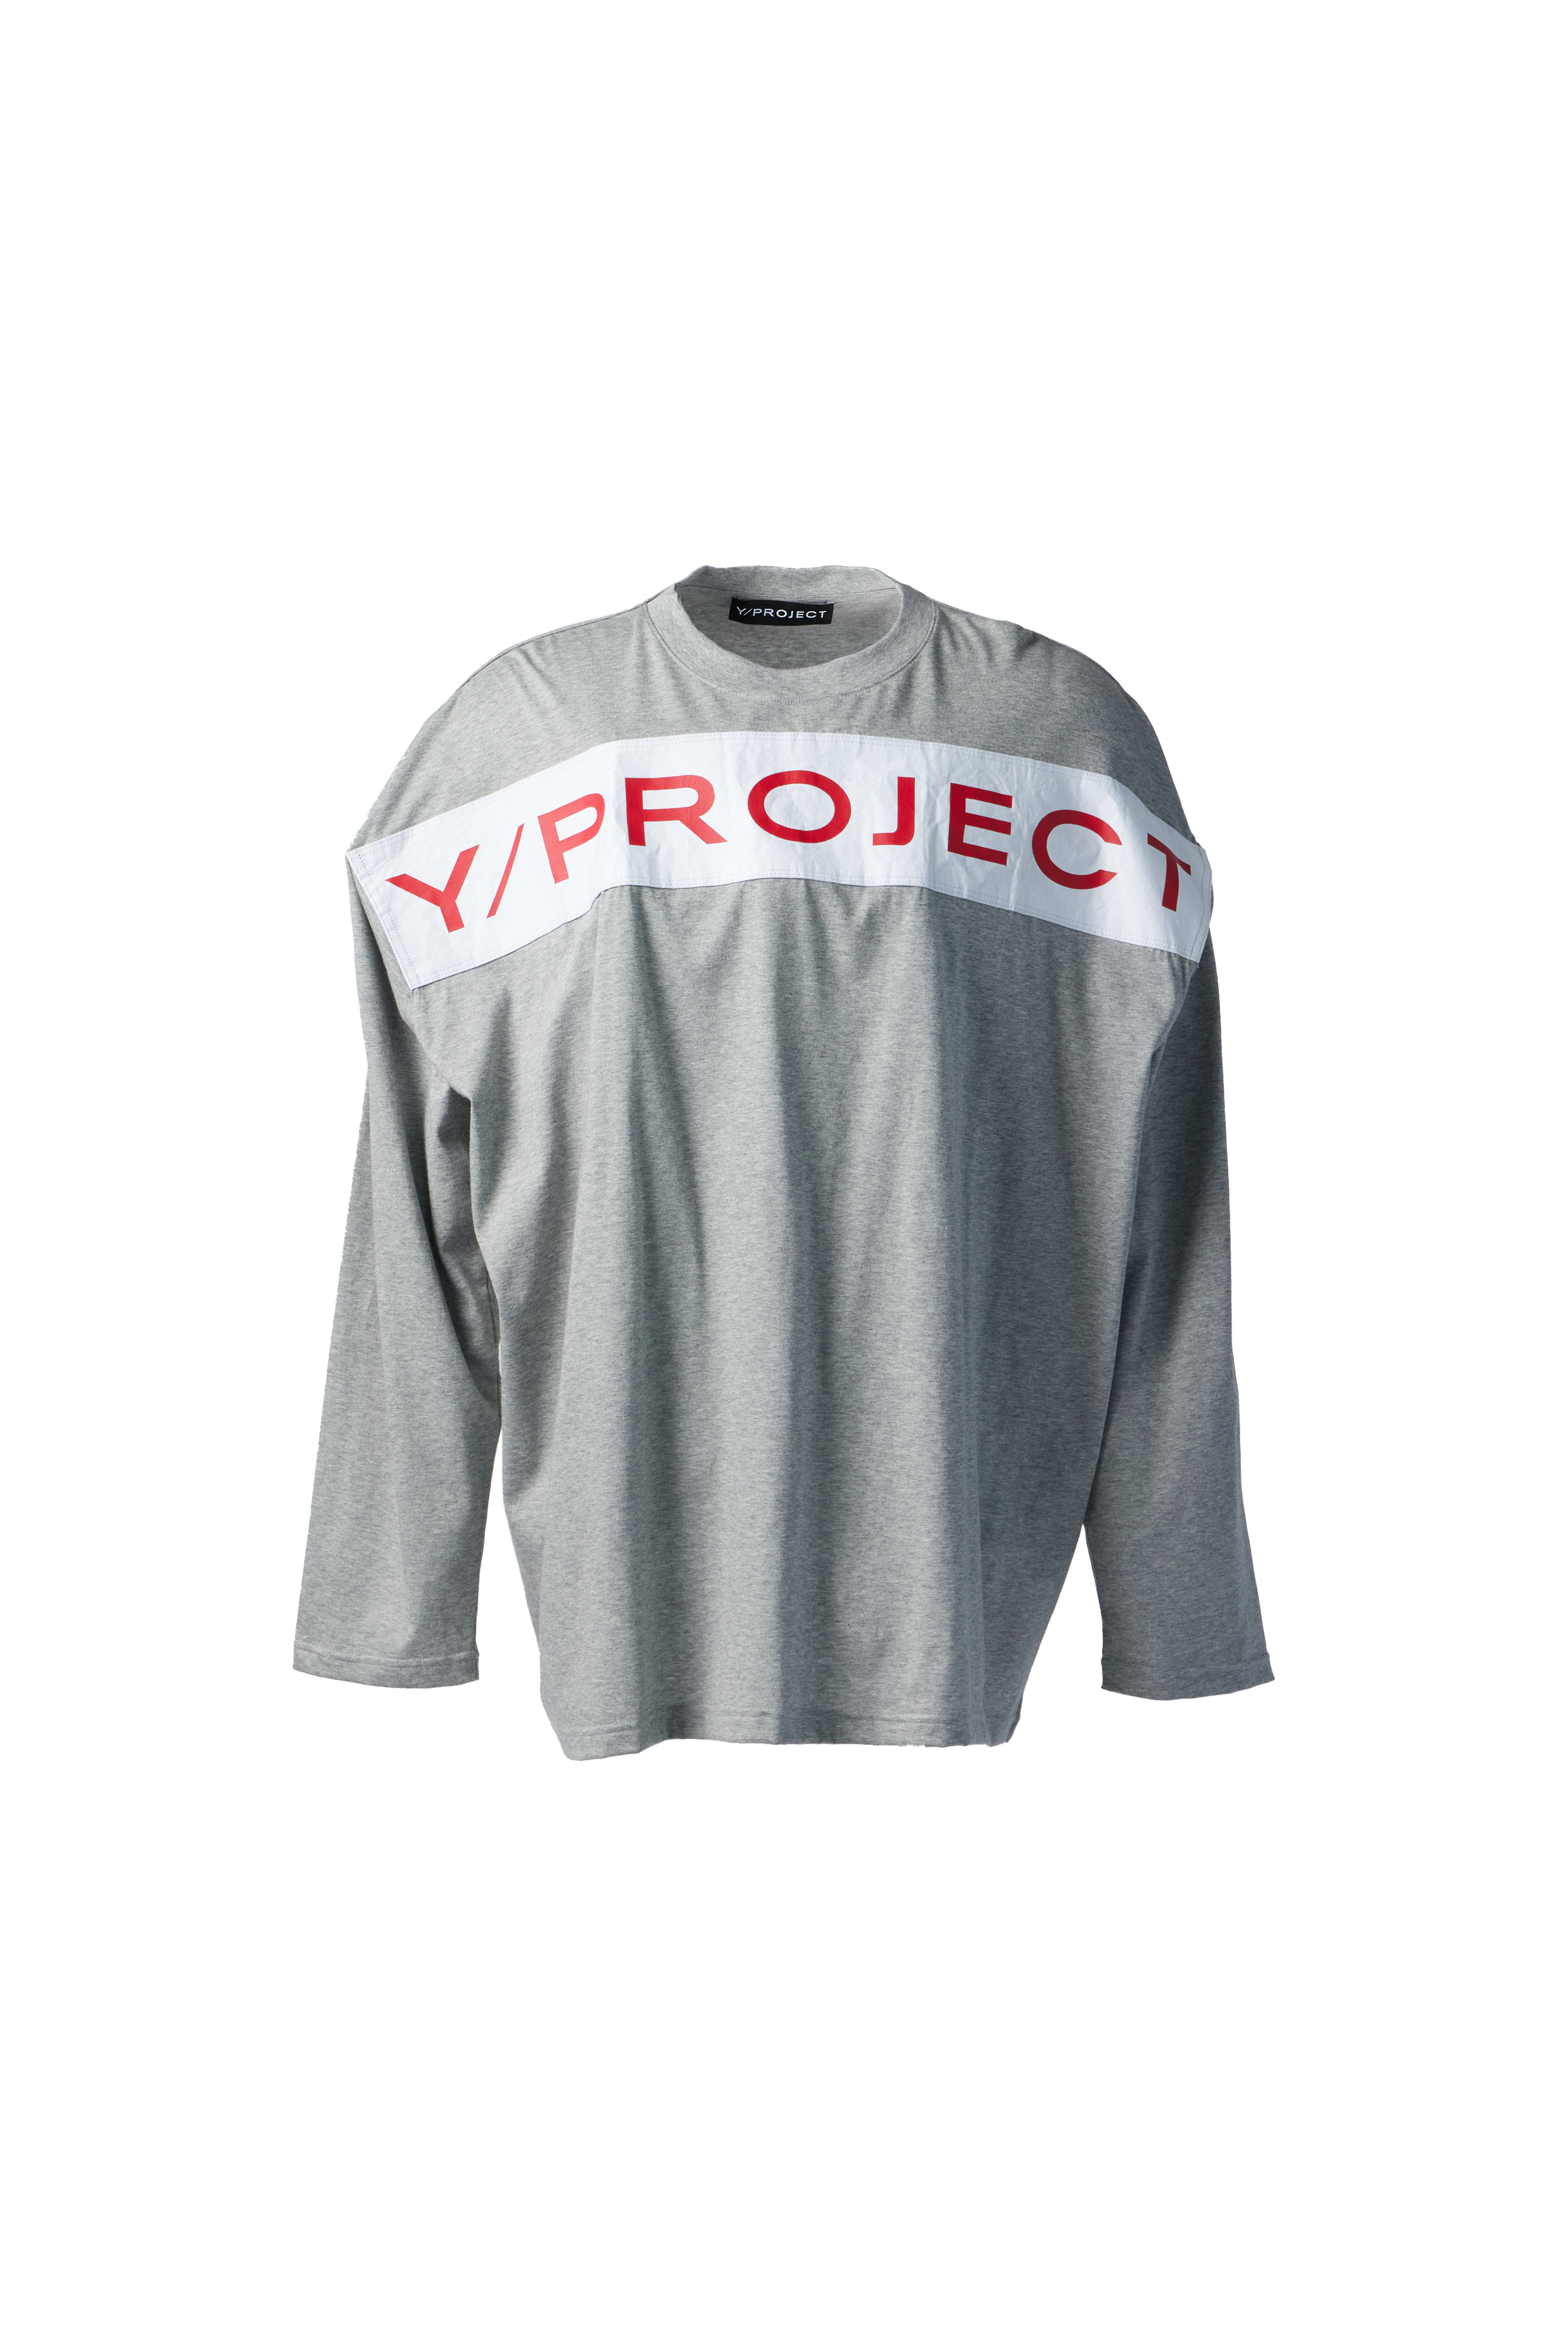 Y/PROJECT - Scrunched Logo L/S T-Shirt product image